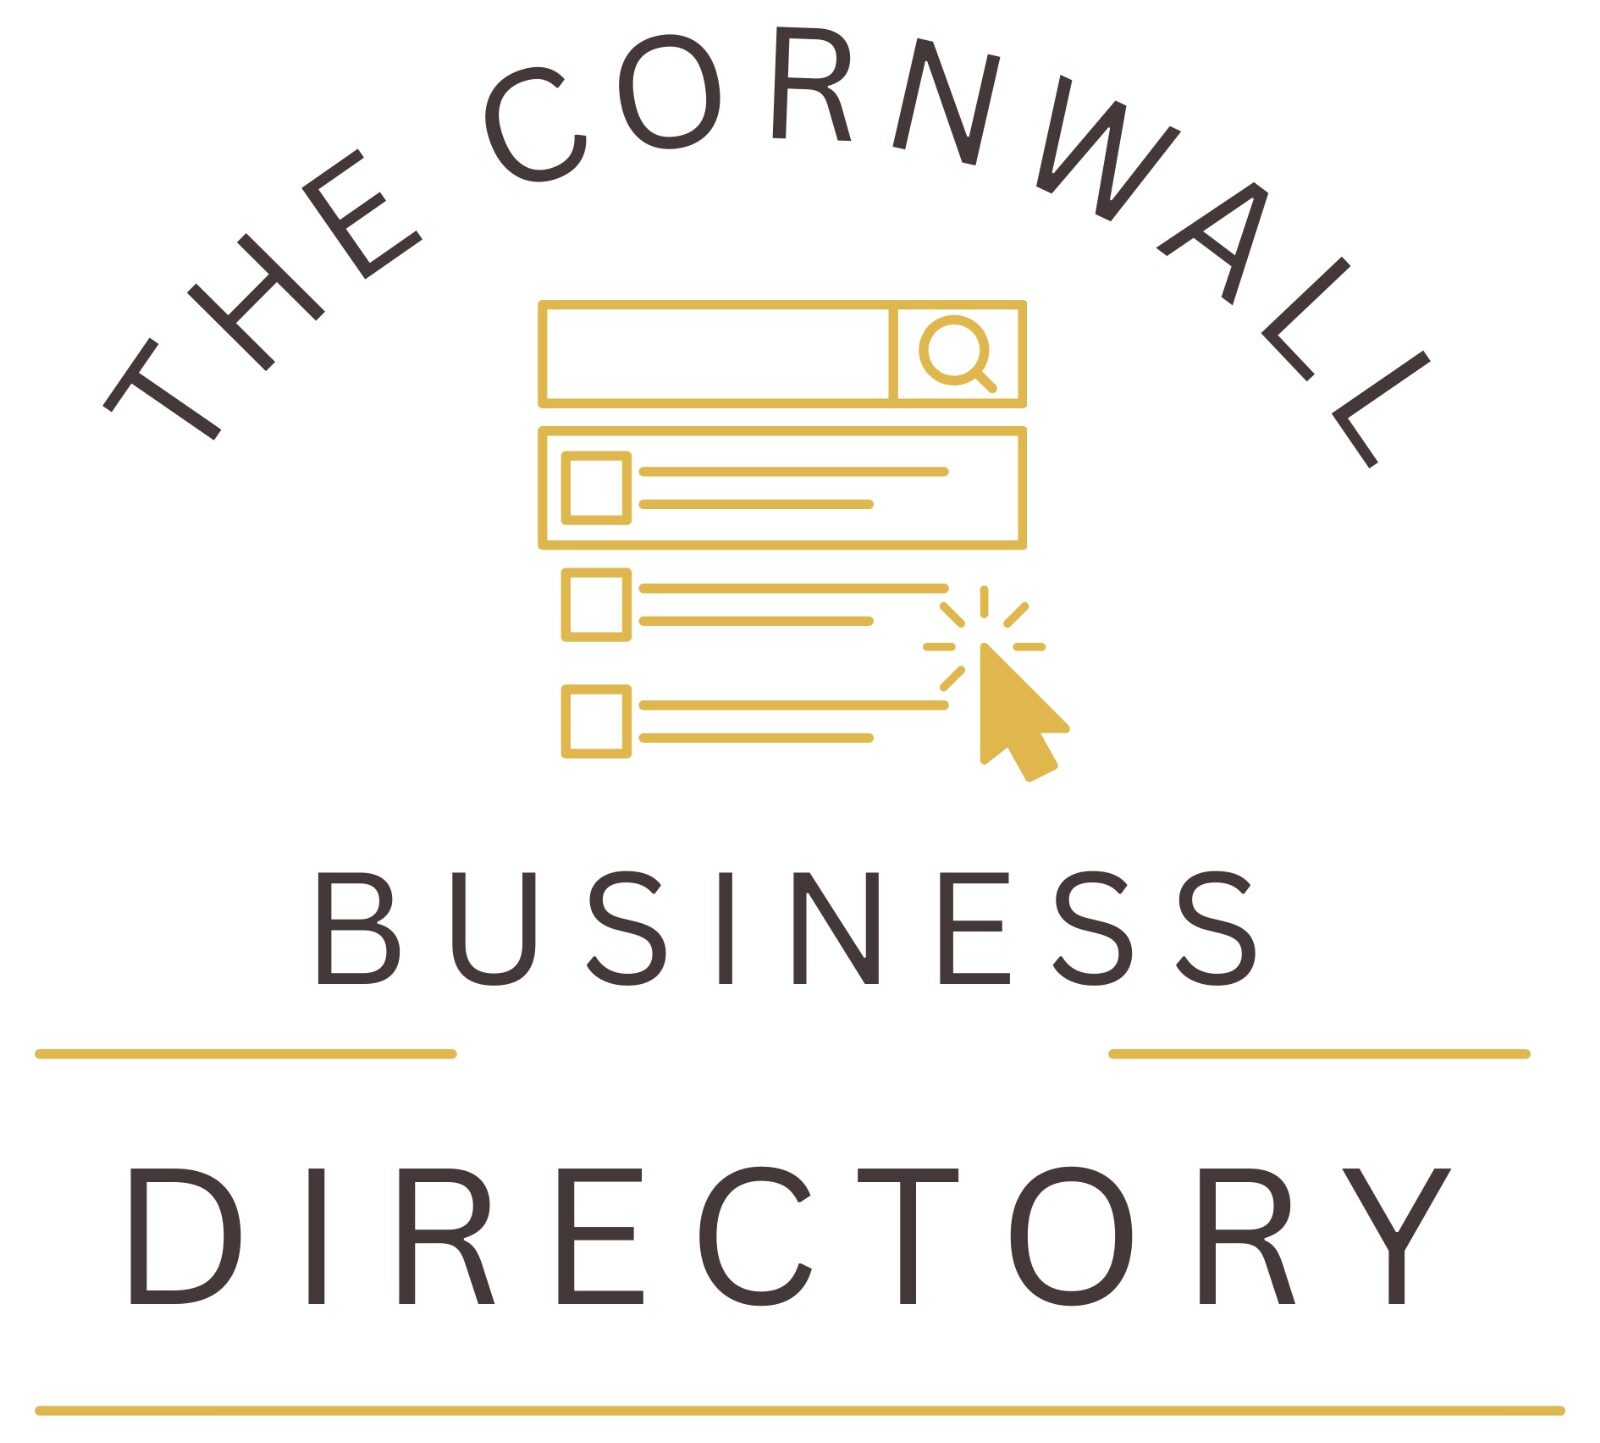 The Cornwall Business Directory